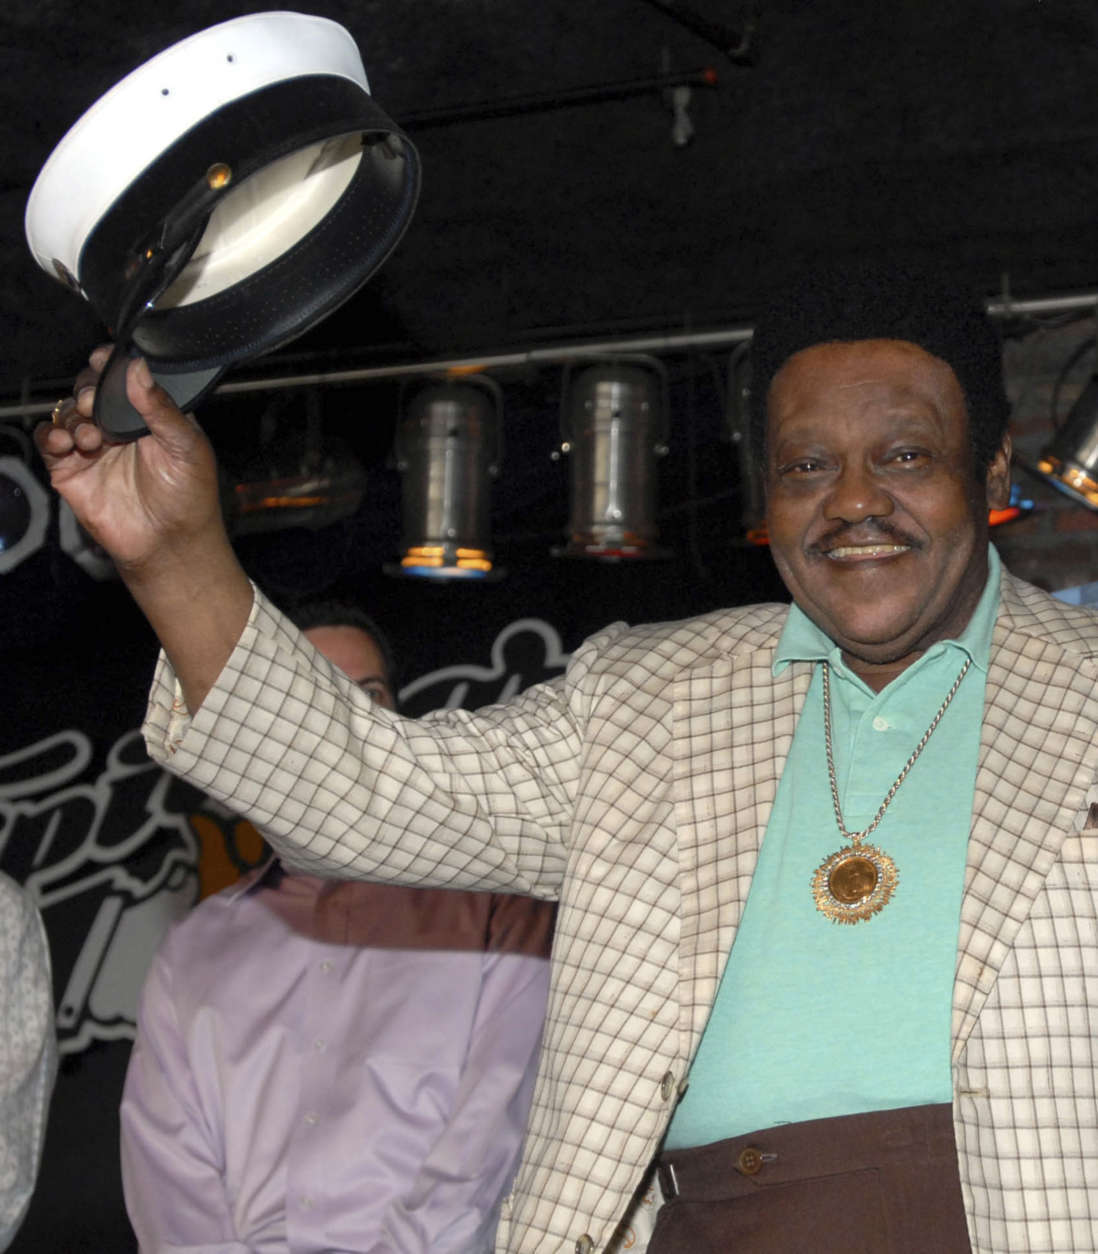 **RECROPPED TRANSMISSION OF LACG103**New Orleans rock 'n' roll performer Fats Domino waves to fans after he received a custom musical career and legacy award by the Recording Industry Association of America and was presented with 20 reproduced sales awards by Capitol/EMI replacing ones that he lost to Hurricane Katrina, in New Orleans on Monday, Aug. 13, 2007. (AP Photo/Cheryl Gerber)